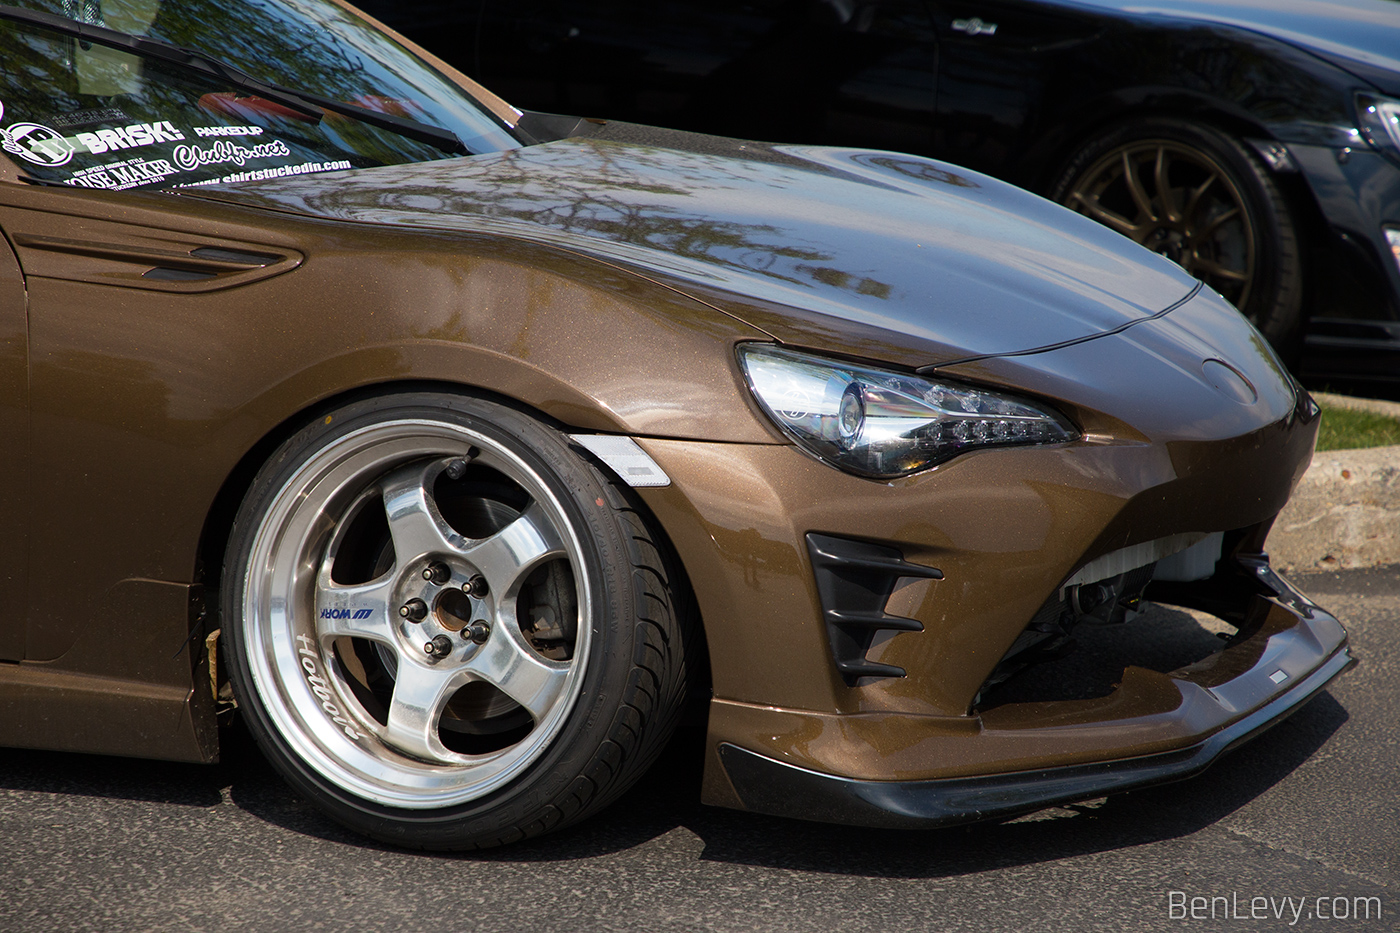 Front Bumper and Fenders on Brown Scion FR-S